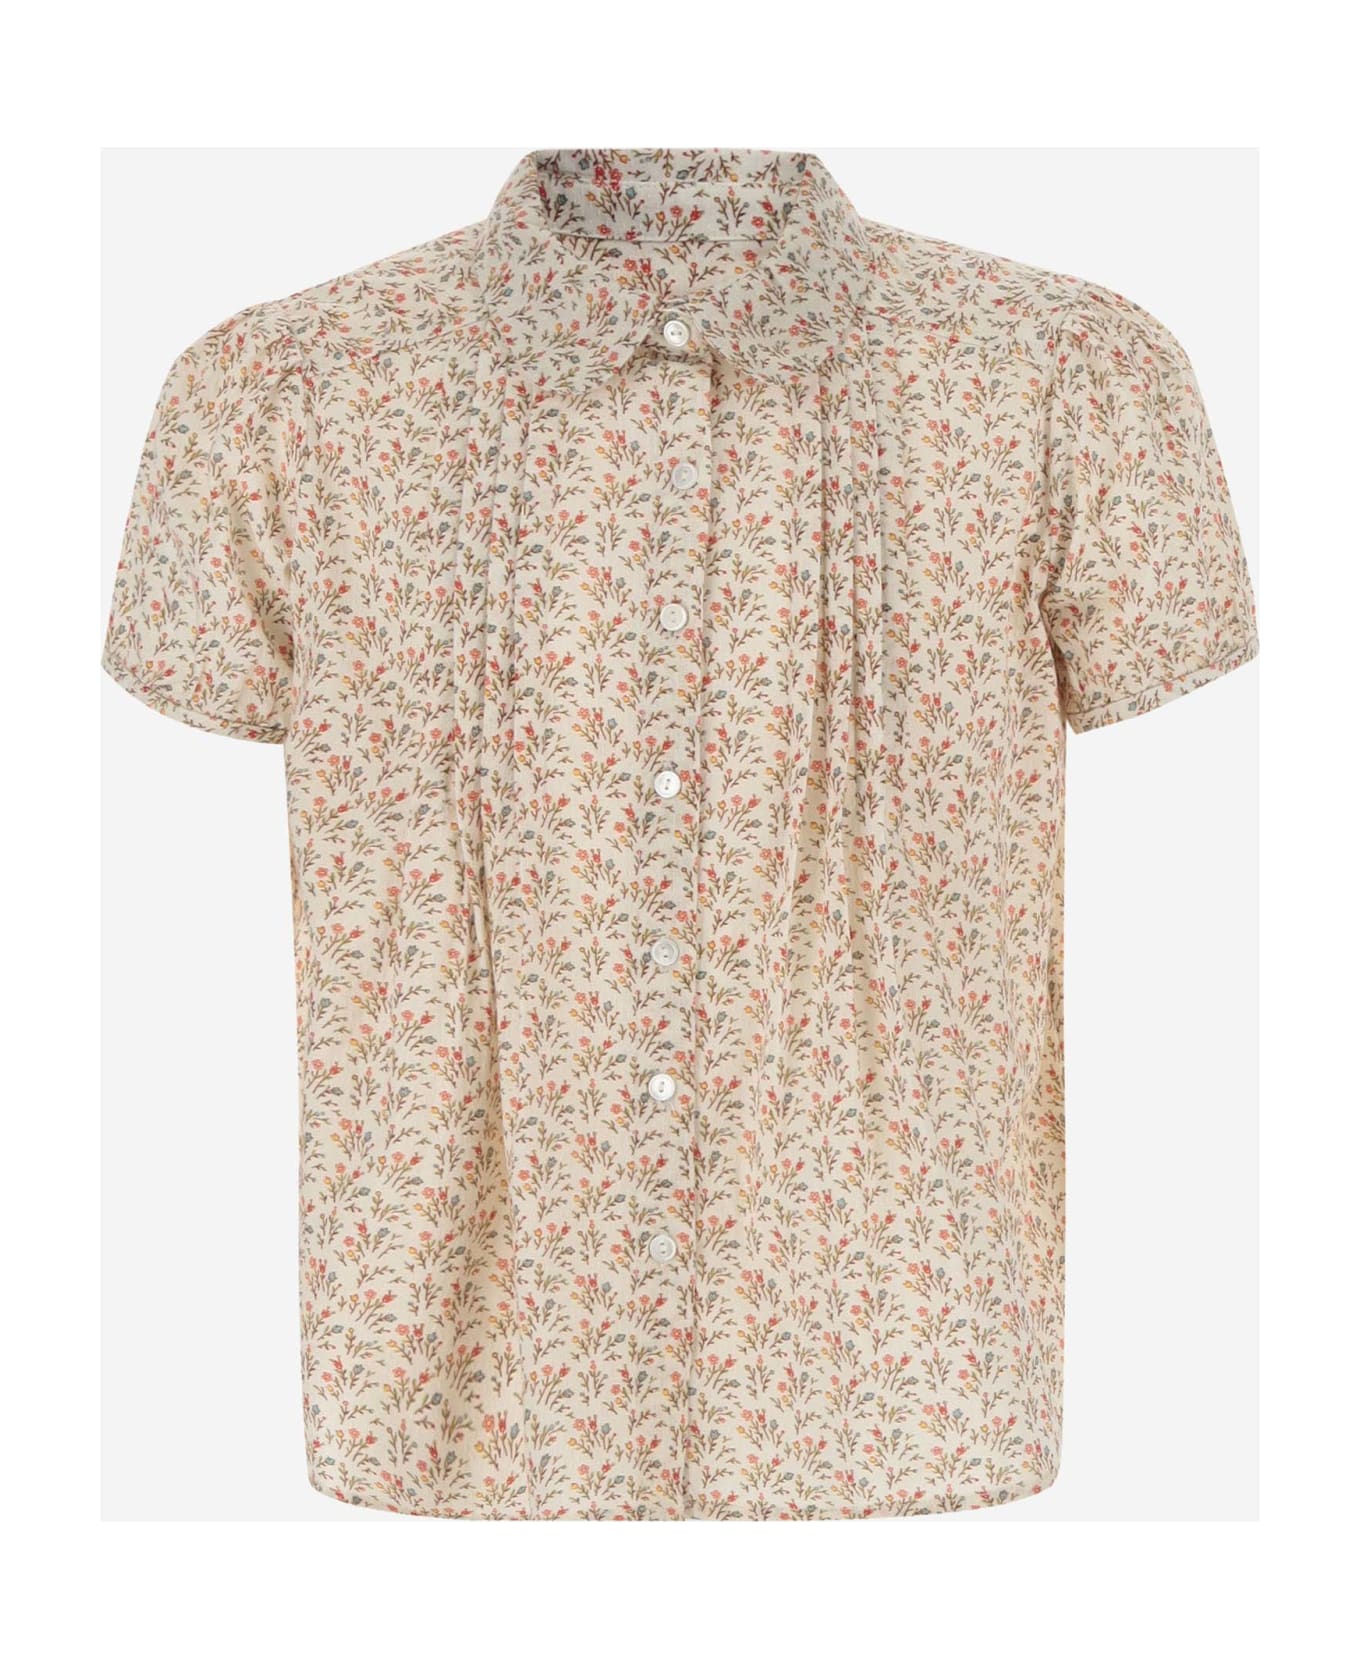 Bonpoint Cotton Shirt With Floral Pattern - Red シャツ